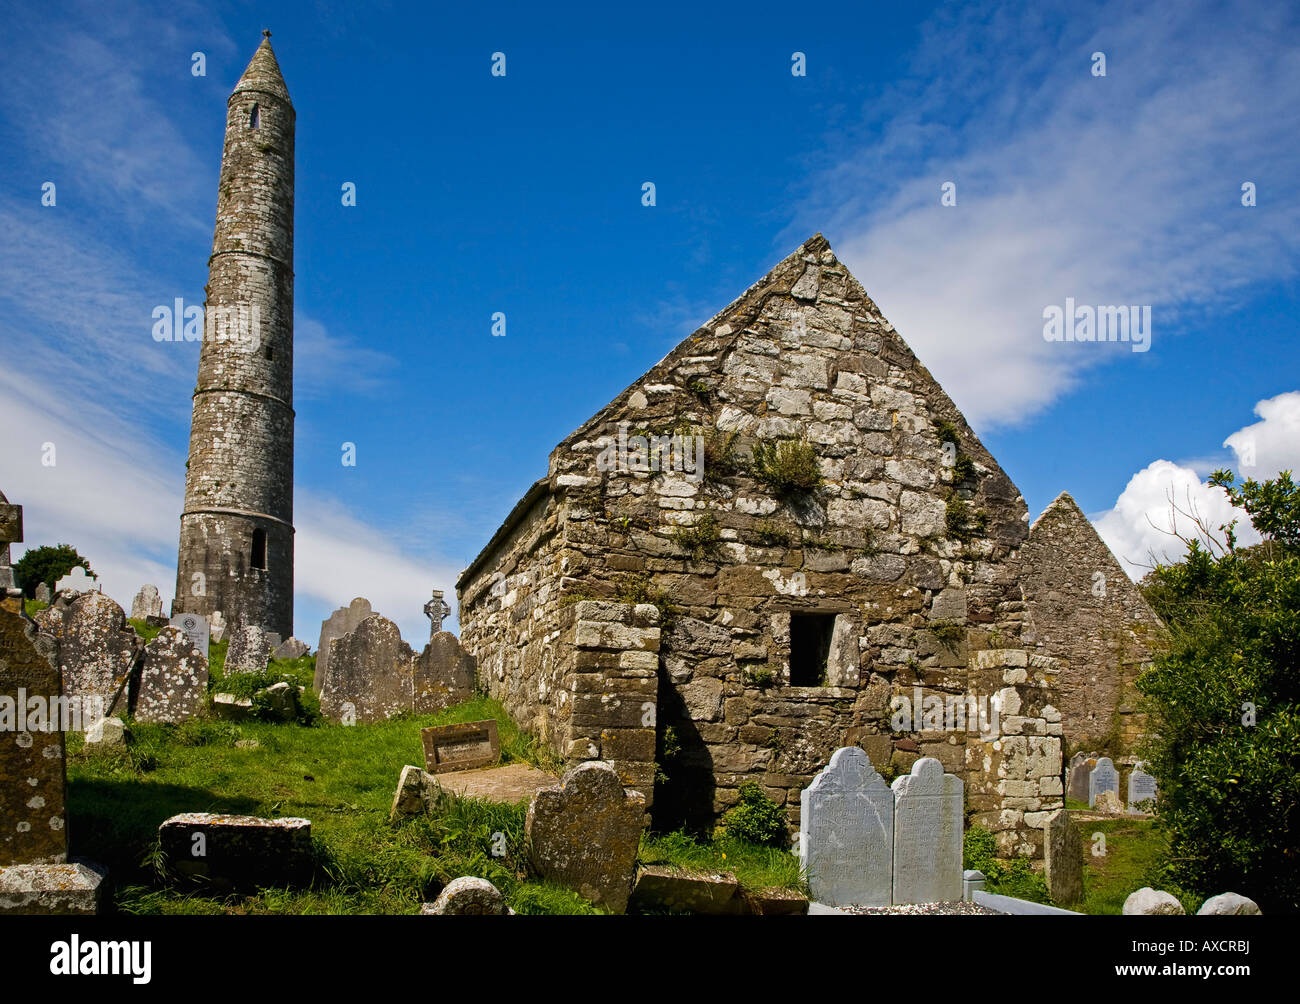 St Declan's 5th Century Monastic Site with the  Round Tower and St Declan's Oratory, Ardmore, County Waterford, Ireland Stock Photo